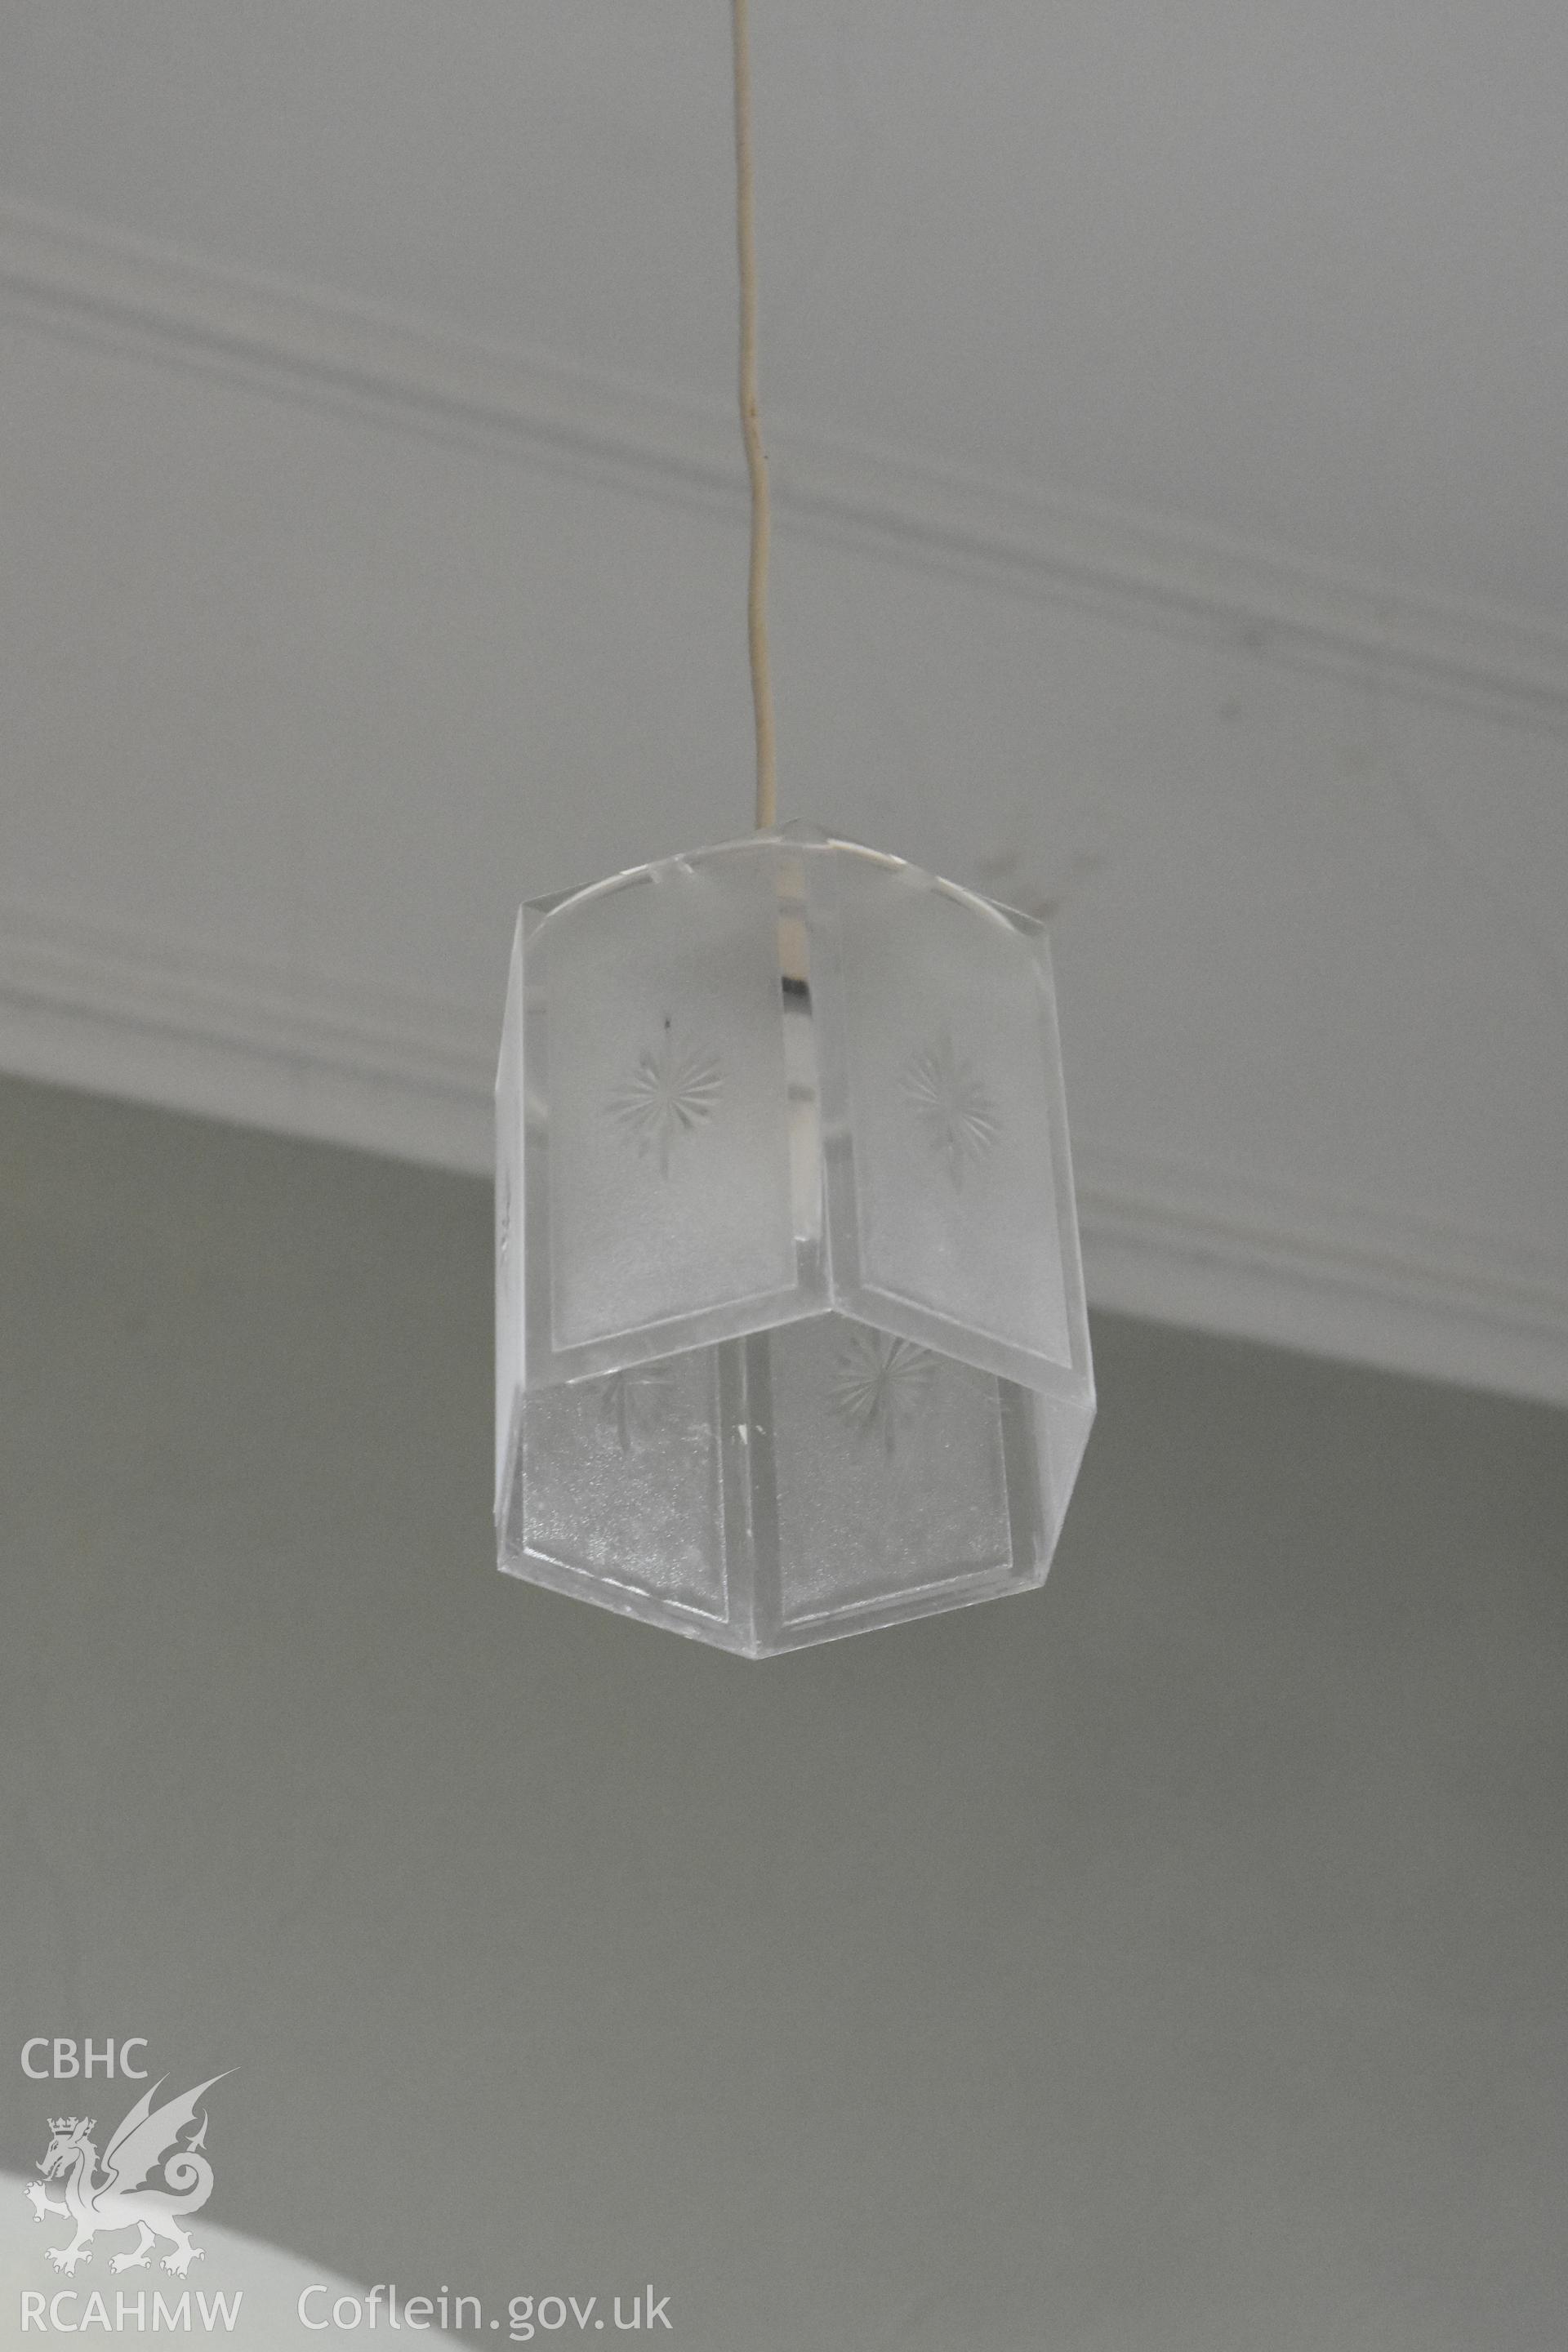 Interior frosted-glass light at Hyssington Primitive Methodist Chapel, Hyssington, Churchstoke. Photographic survey conducted by Sue Fielding on 7th December 2018.